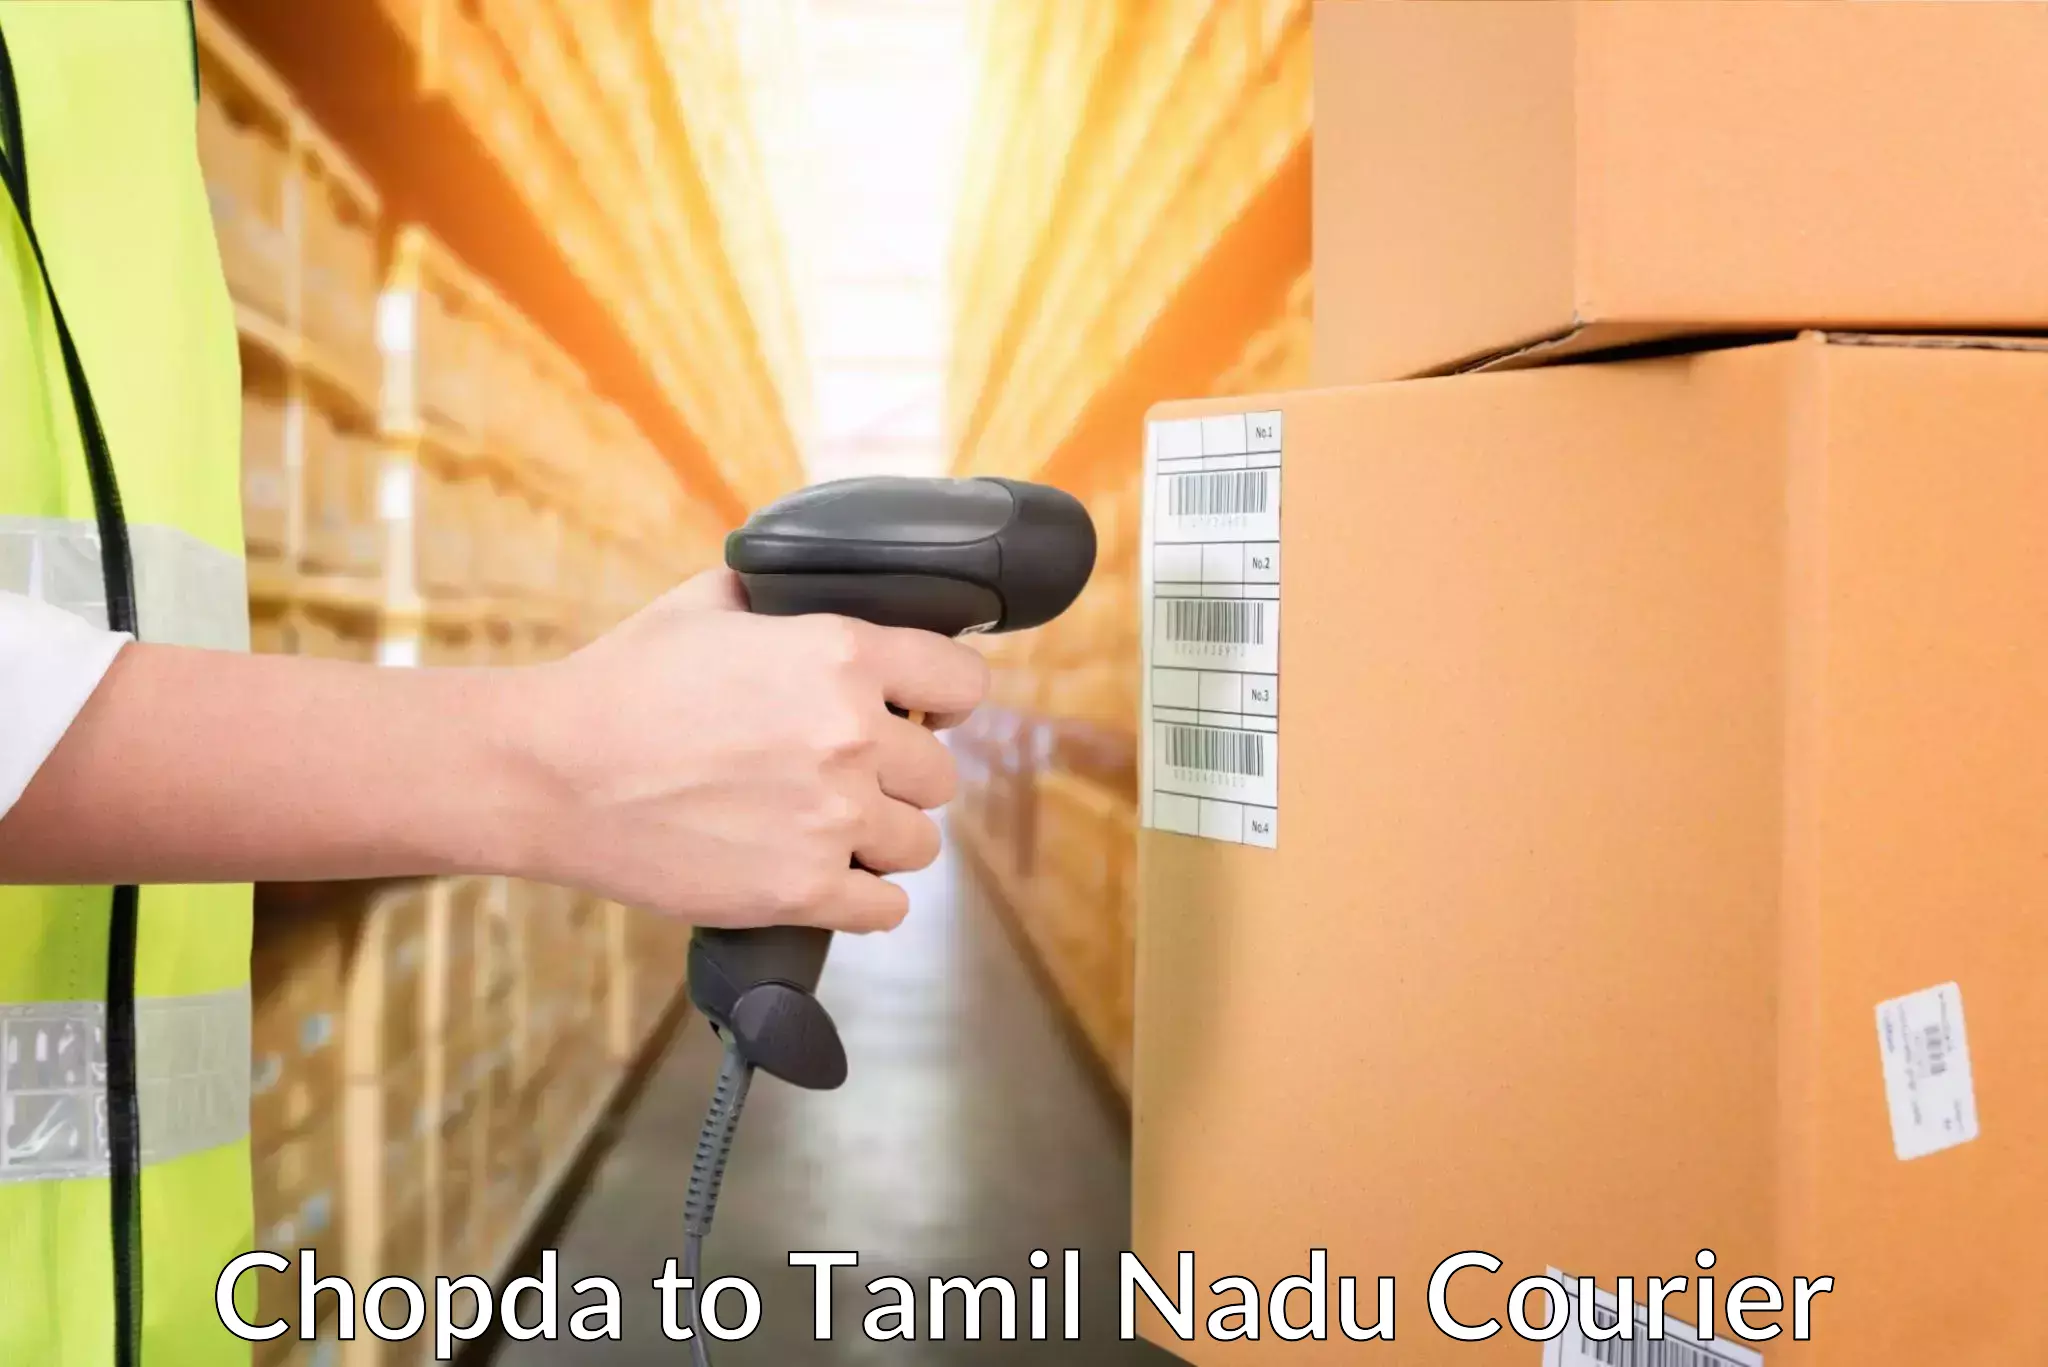 Sustainable shipping practices Chopda to Mettur